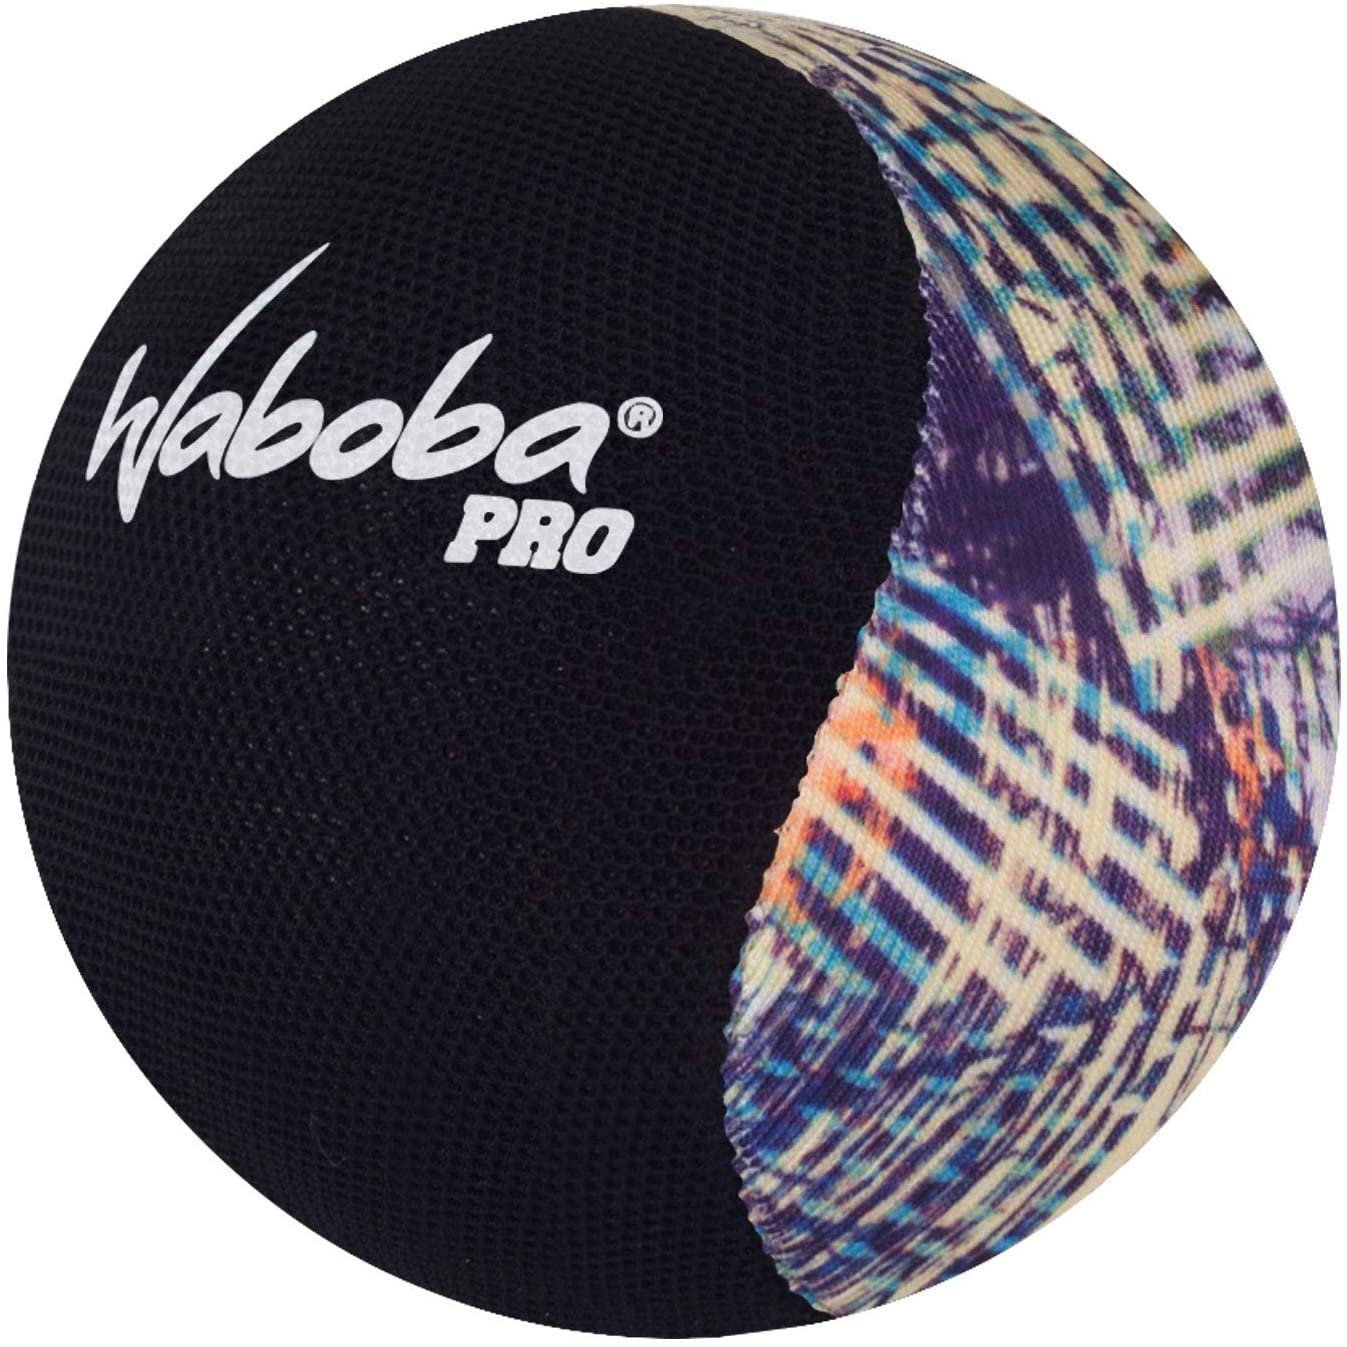 Waboba Pro Extreme Water Bouncing Ball - image 3 of 6